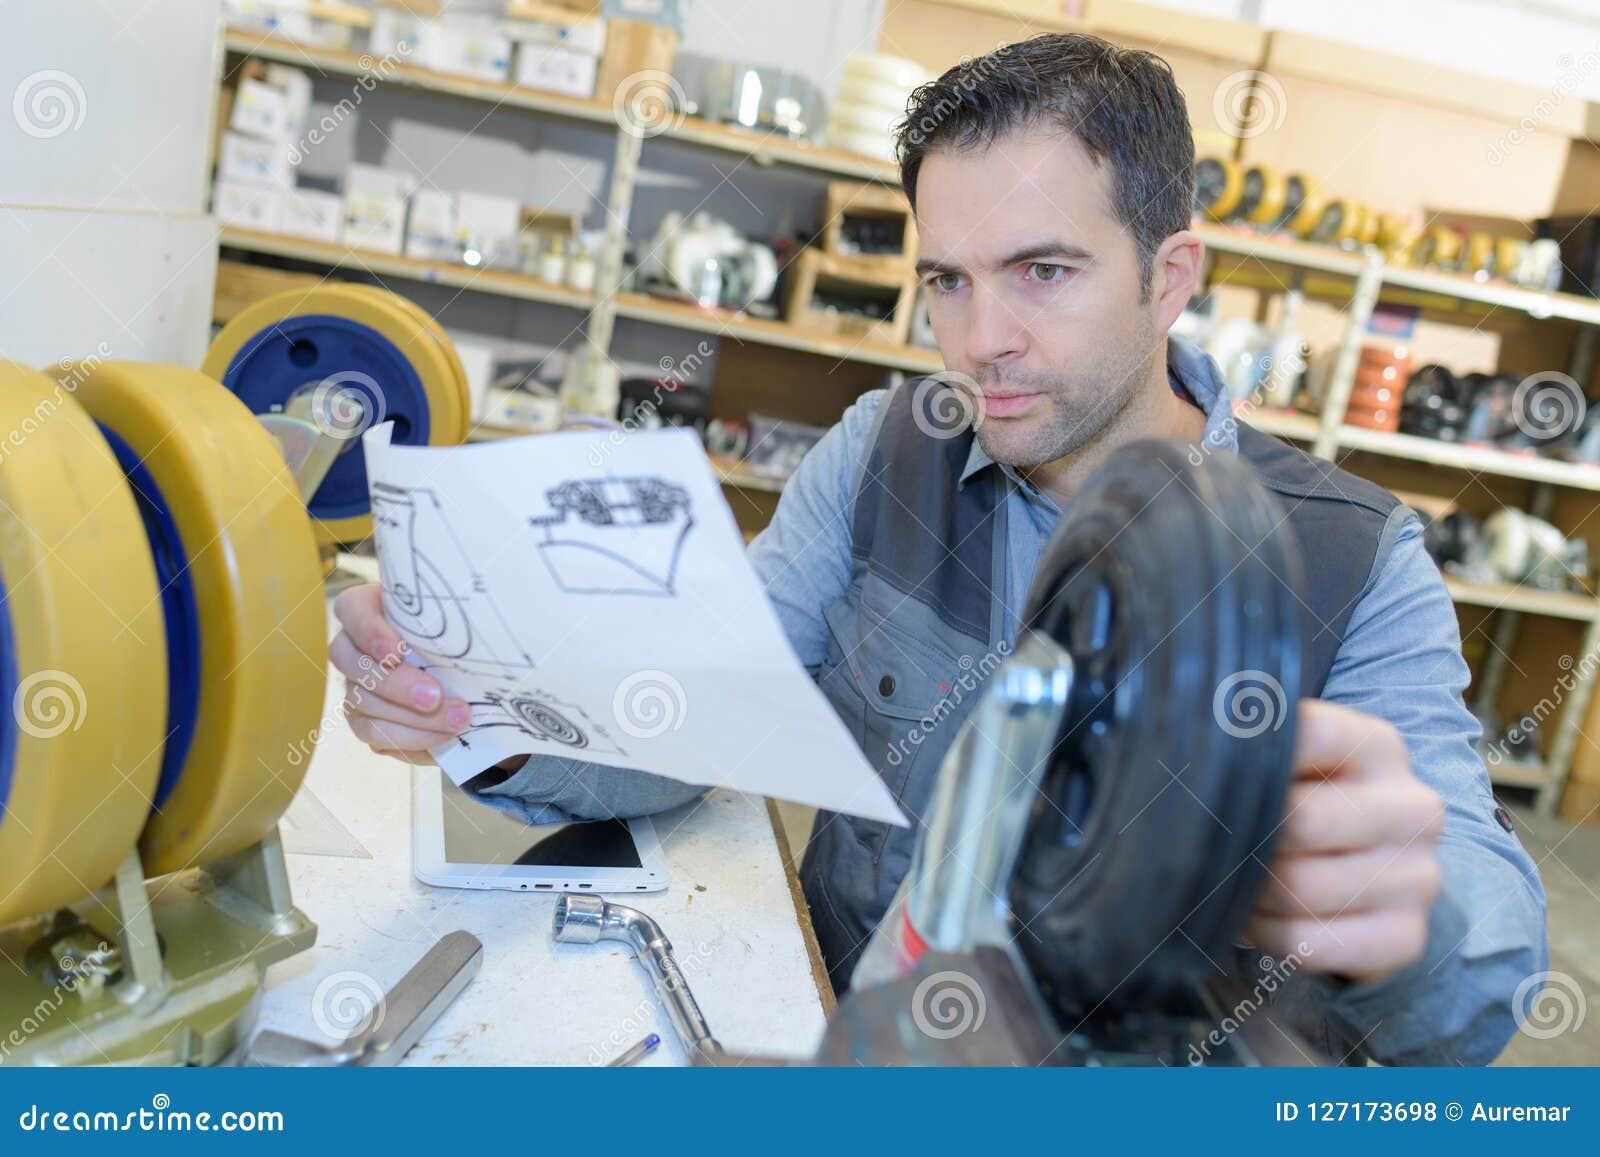 Mechanical Engineer Checking Technical Drawings Stock Photo - Image of